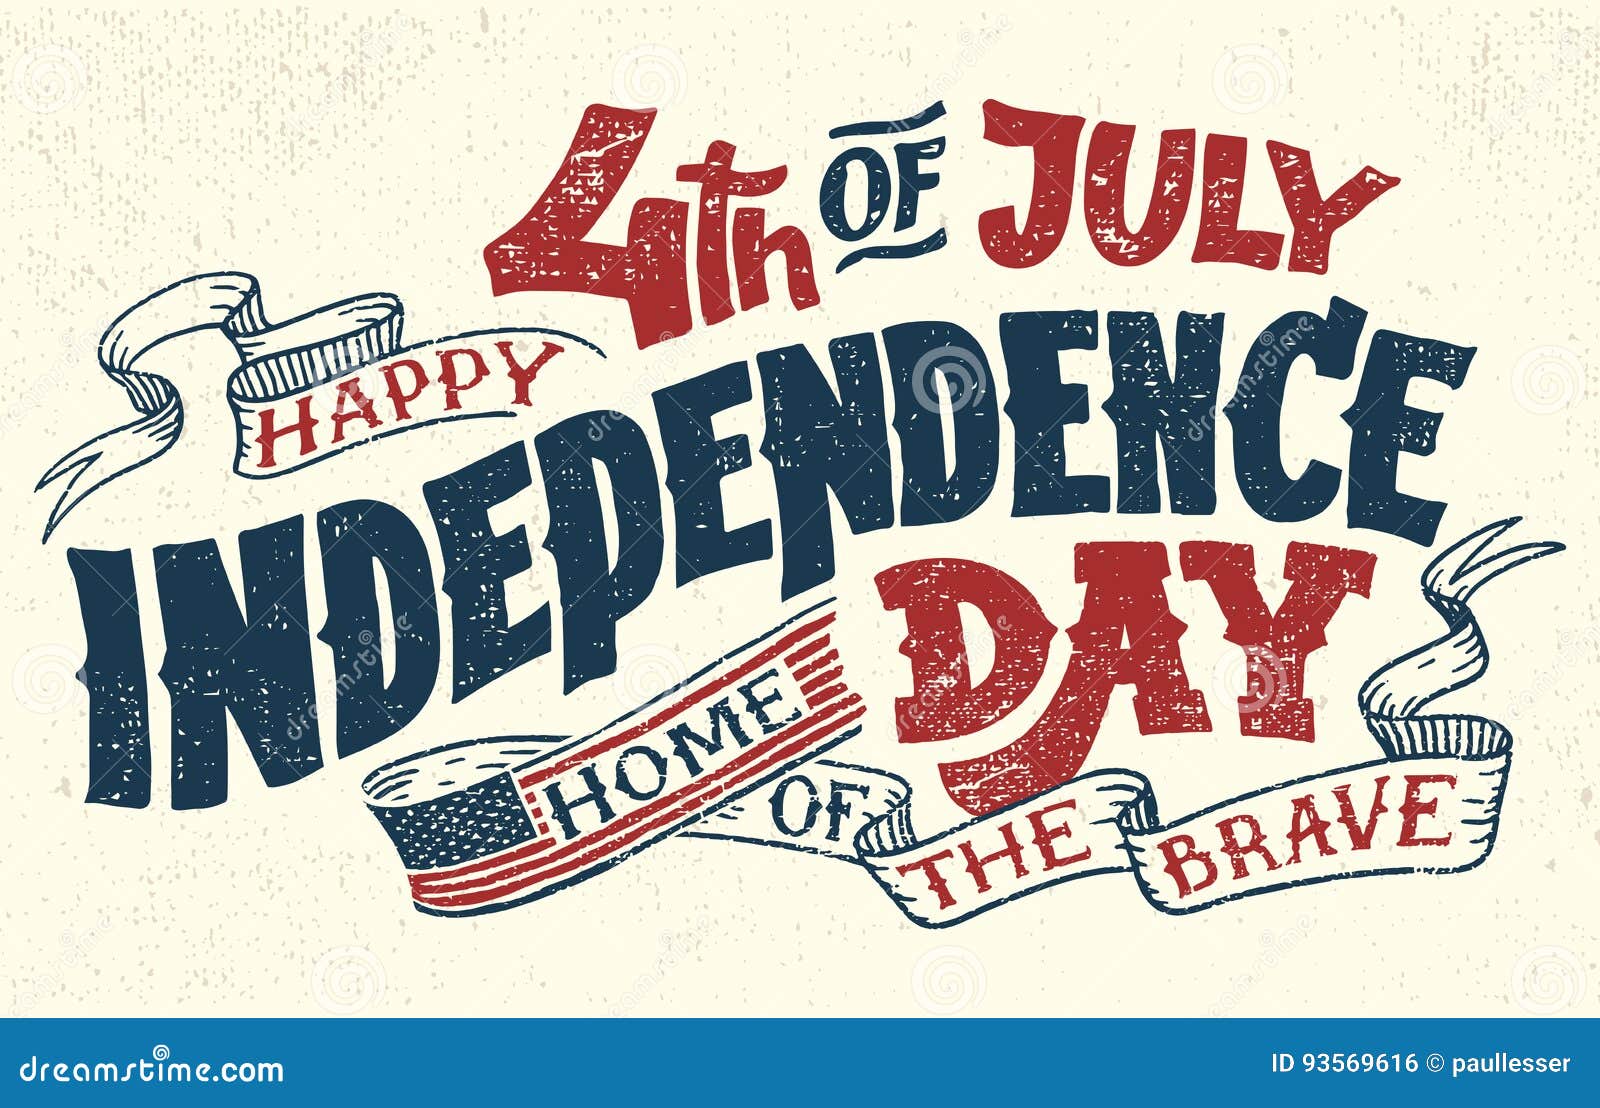 happy fourth of july hand lettering greeting card